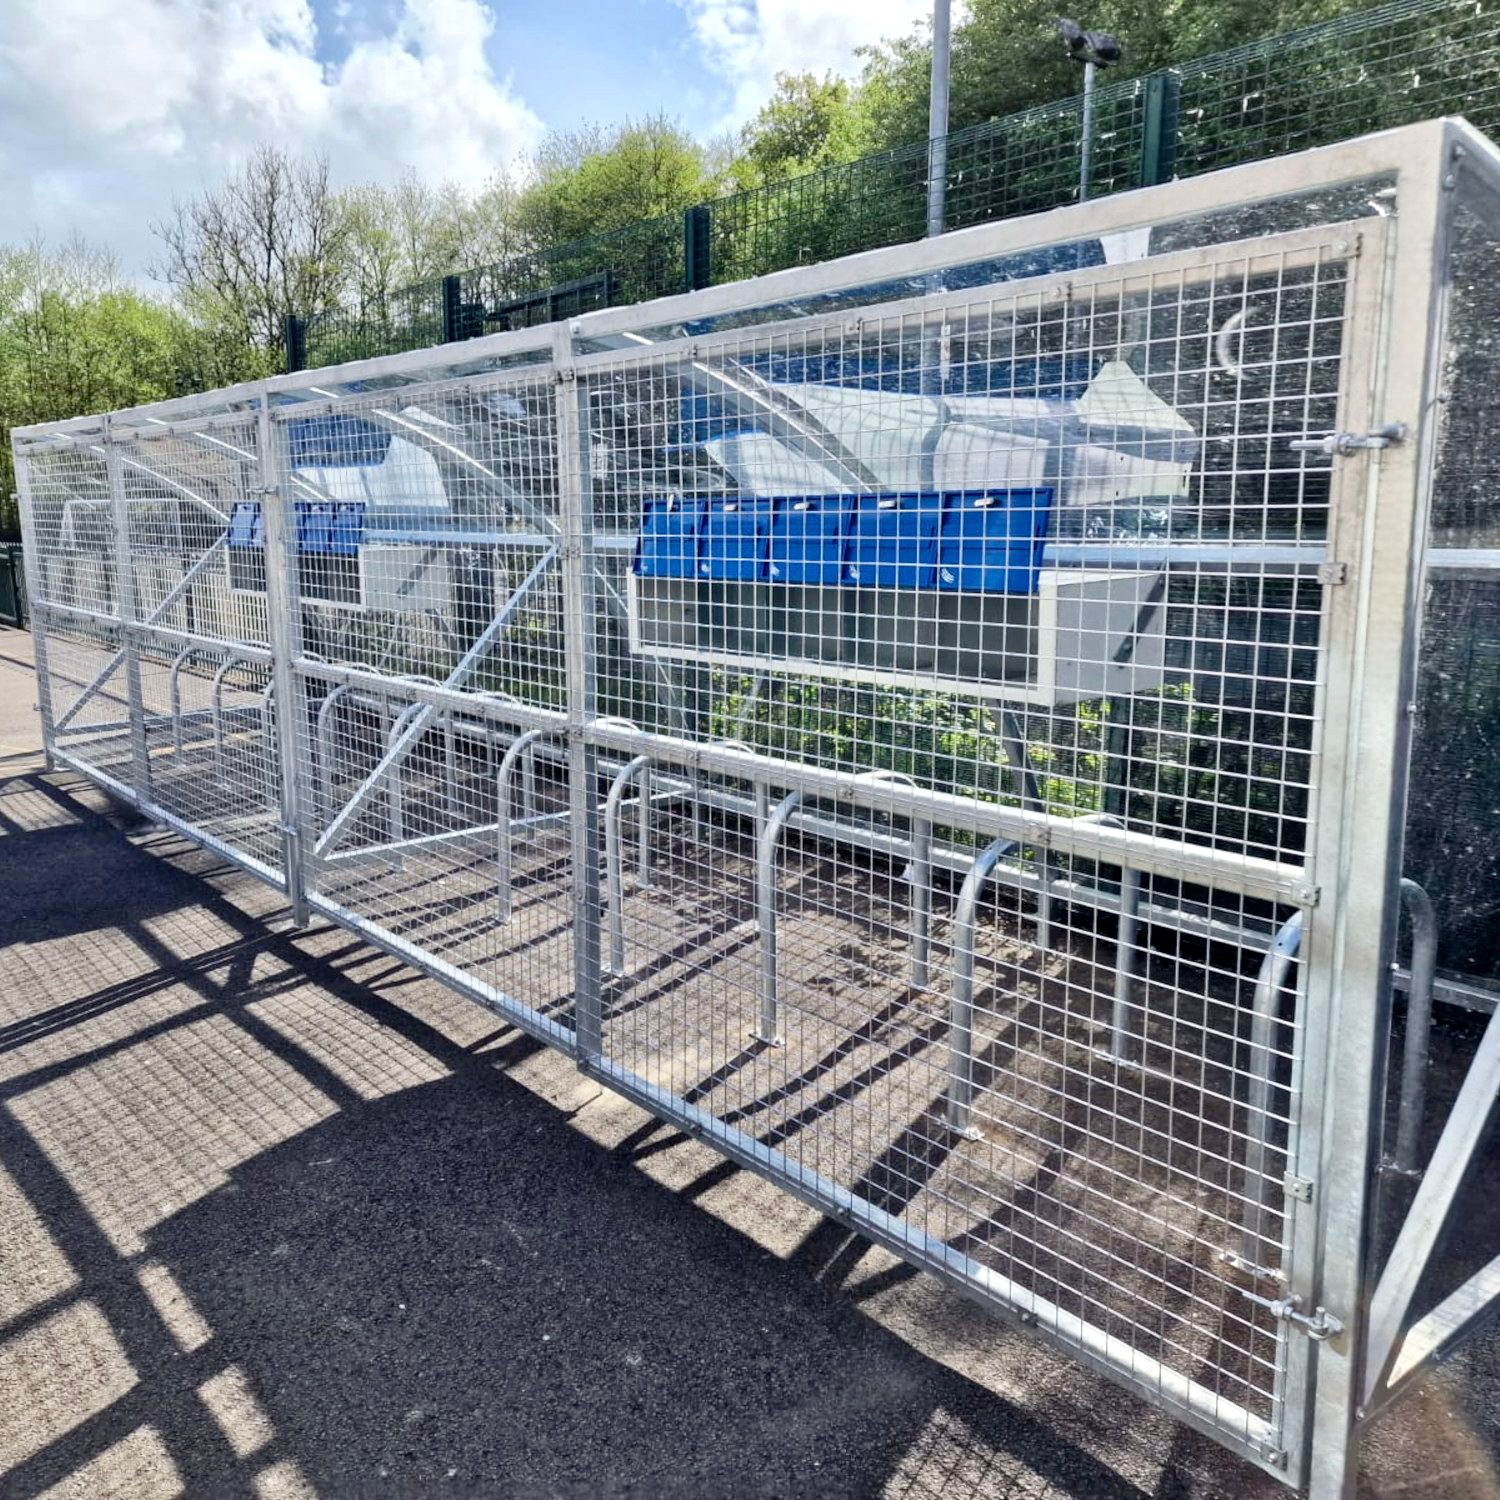 20 space original cycle shelter with grated security partitioning